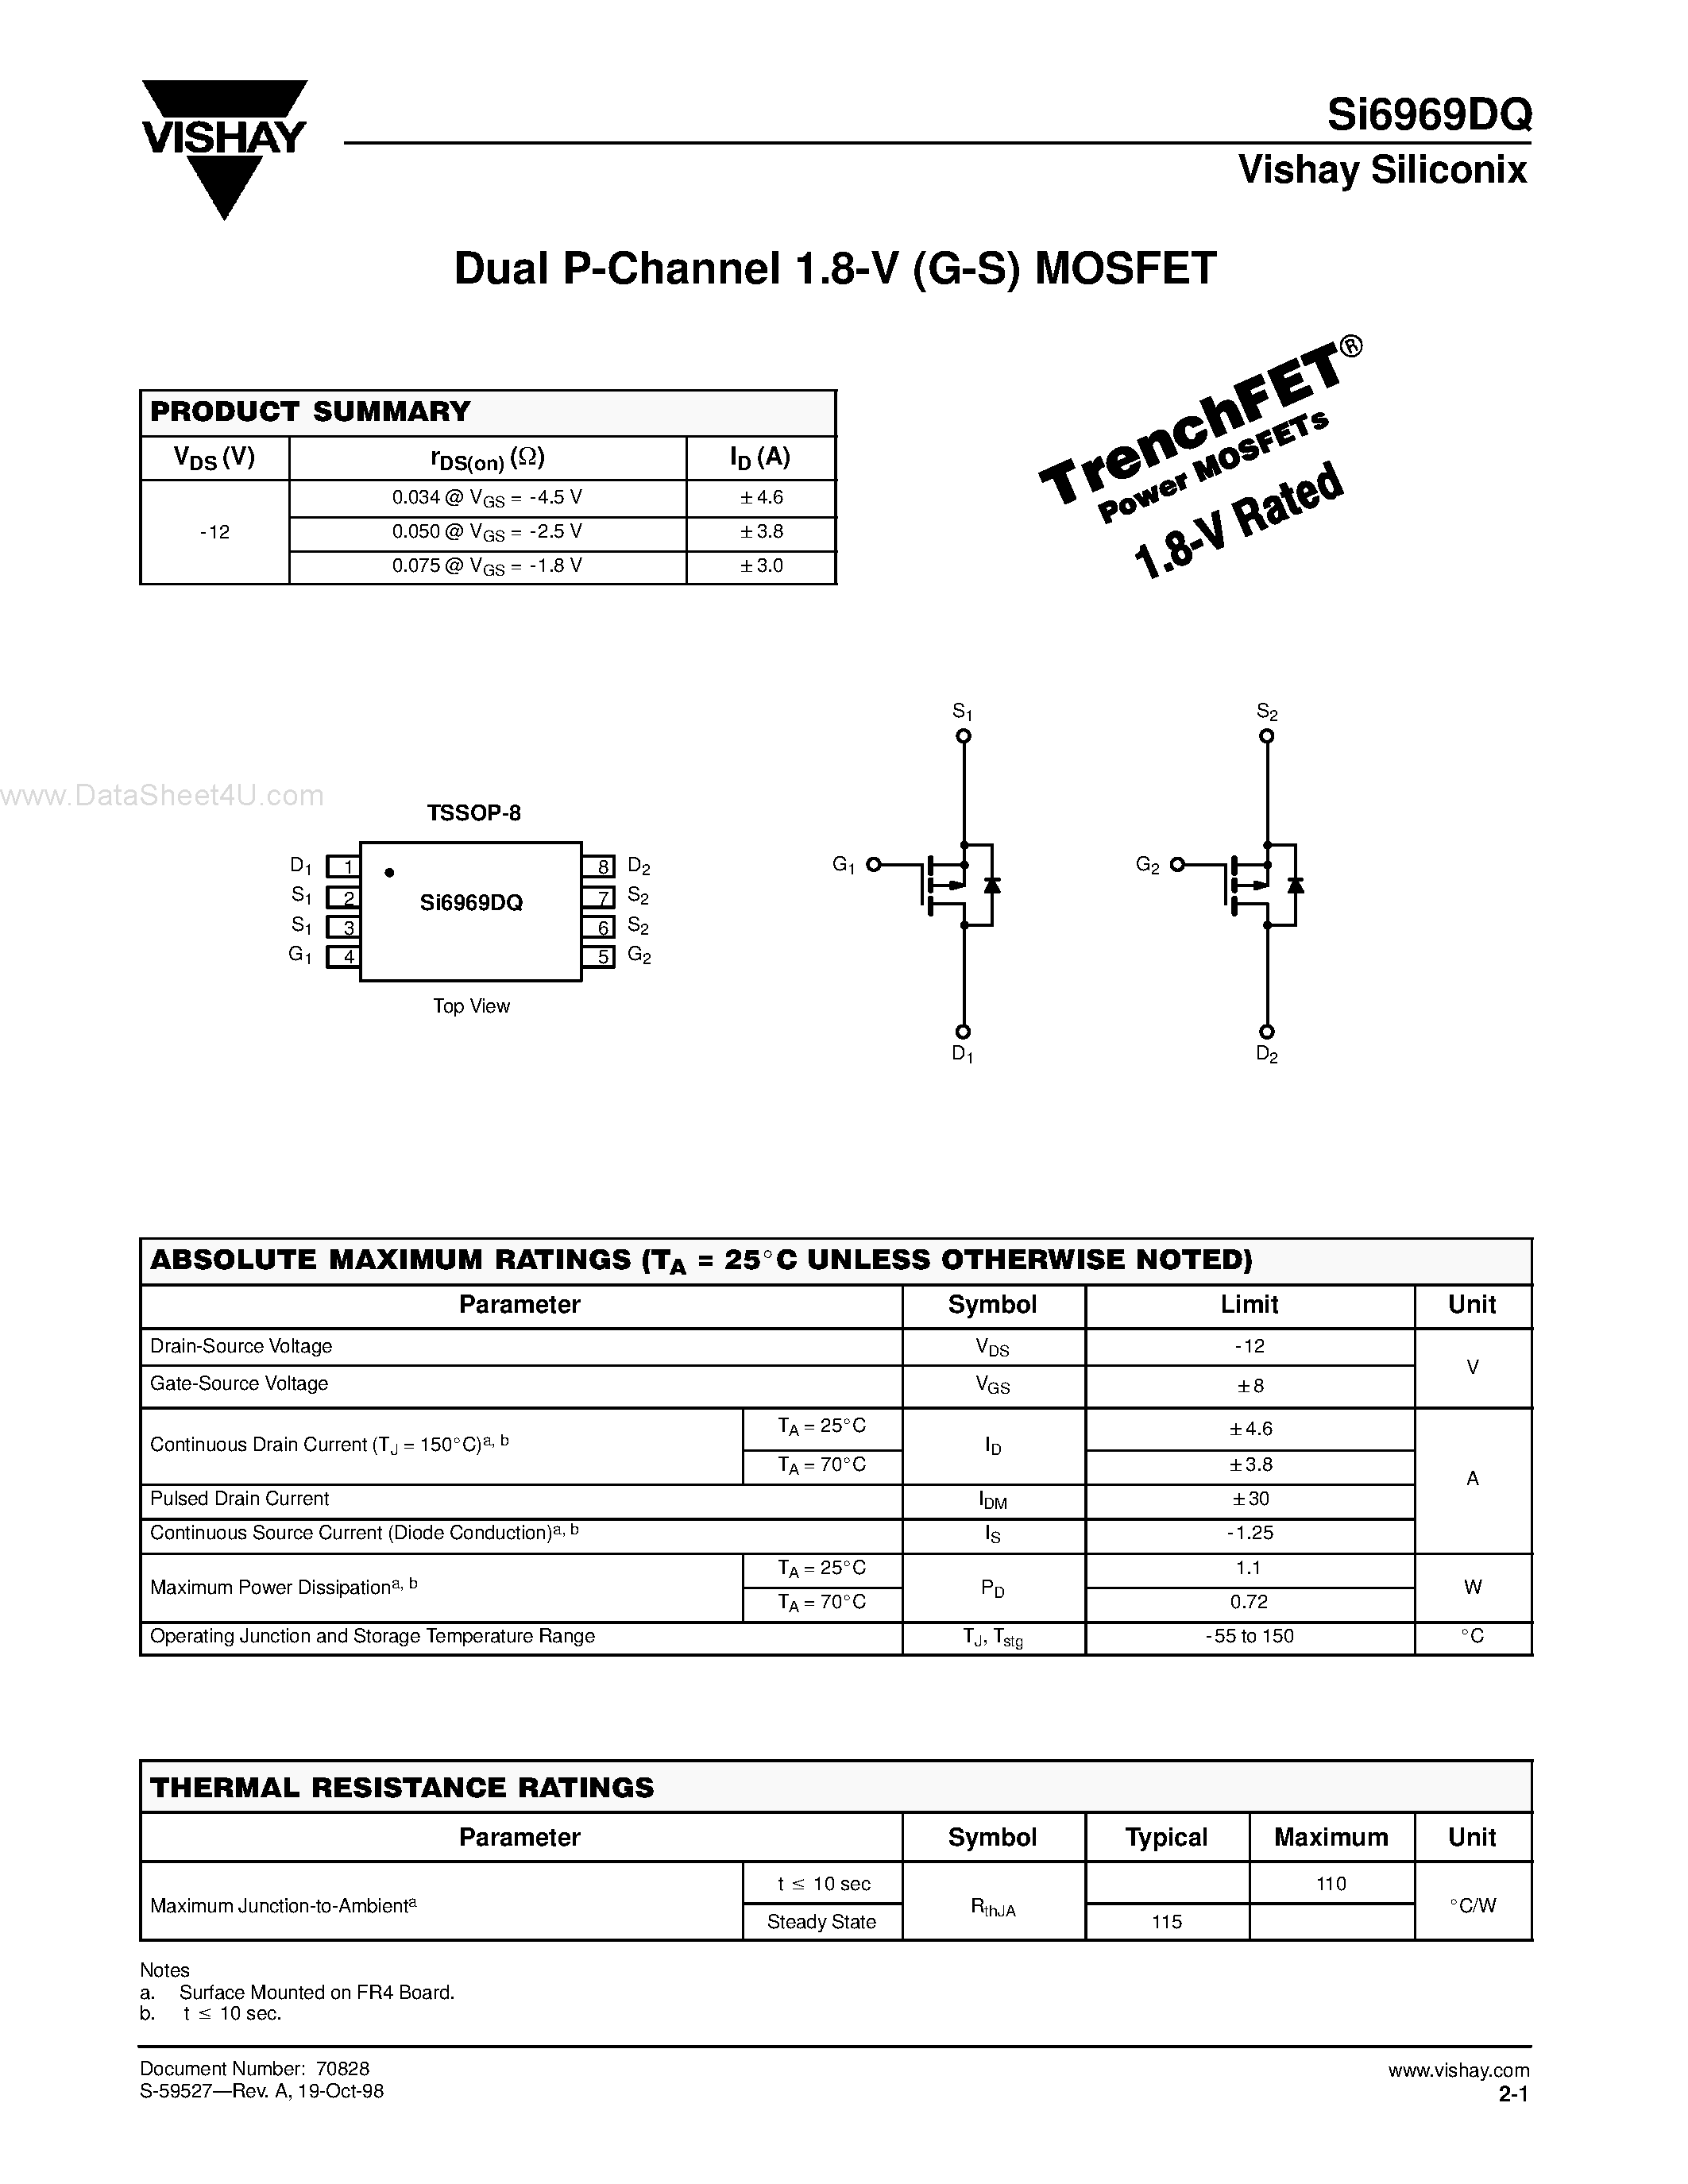 Datasheet SI6969DQ - Dual P-Channel 1.8-V (G-S) MOSFET page 1